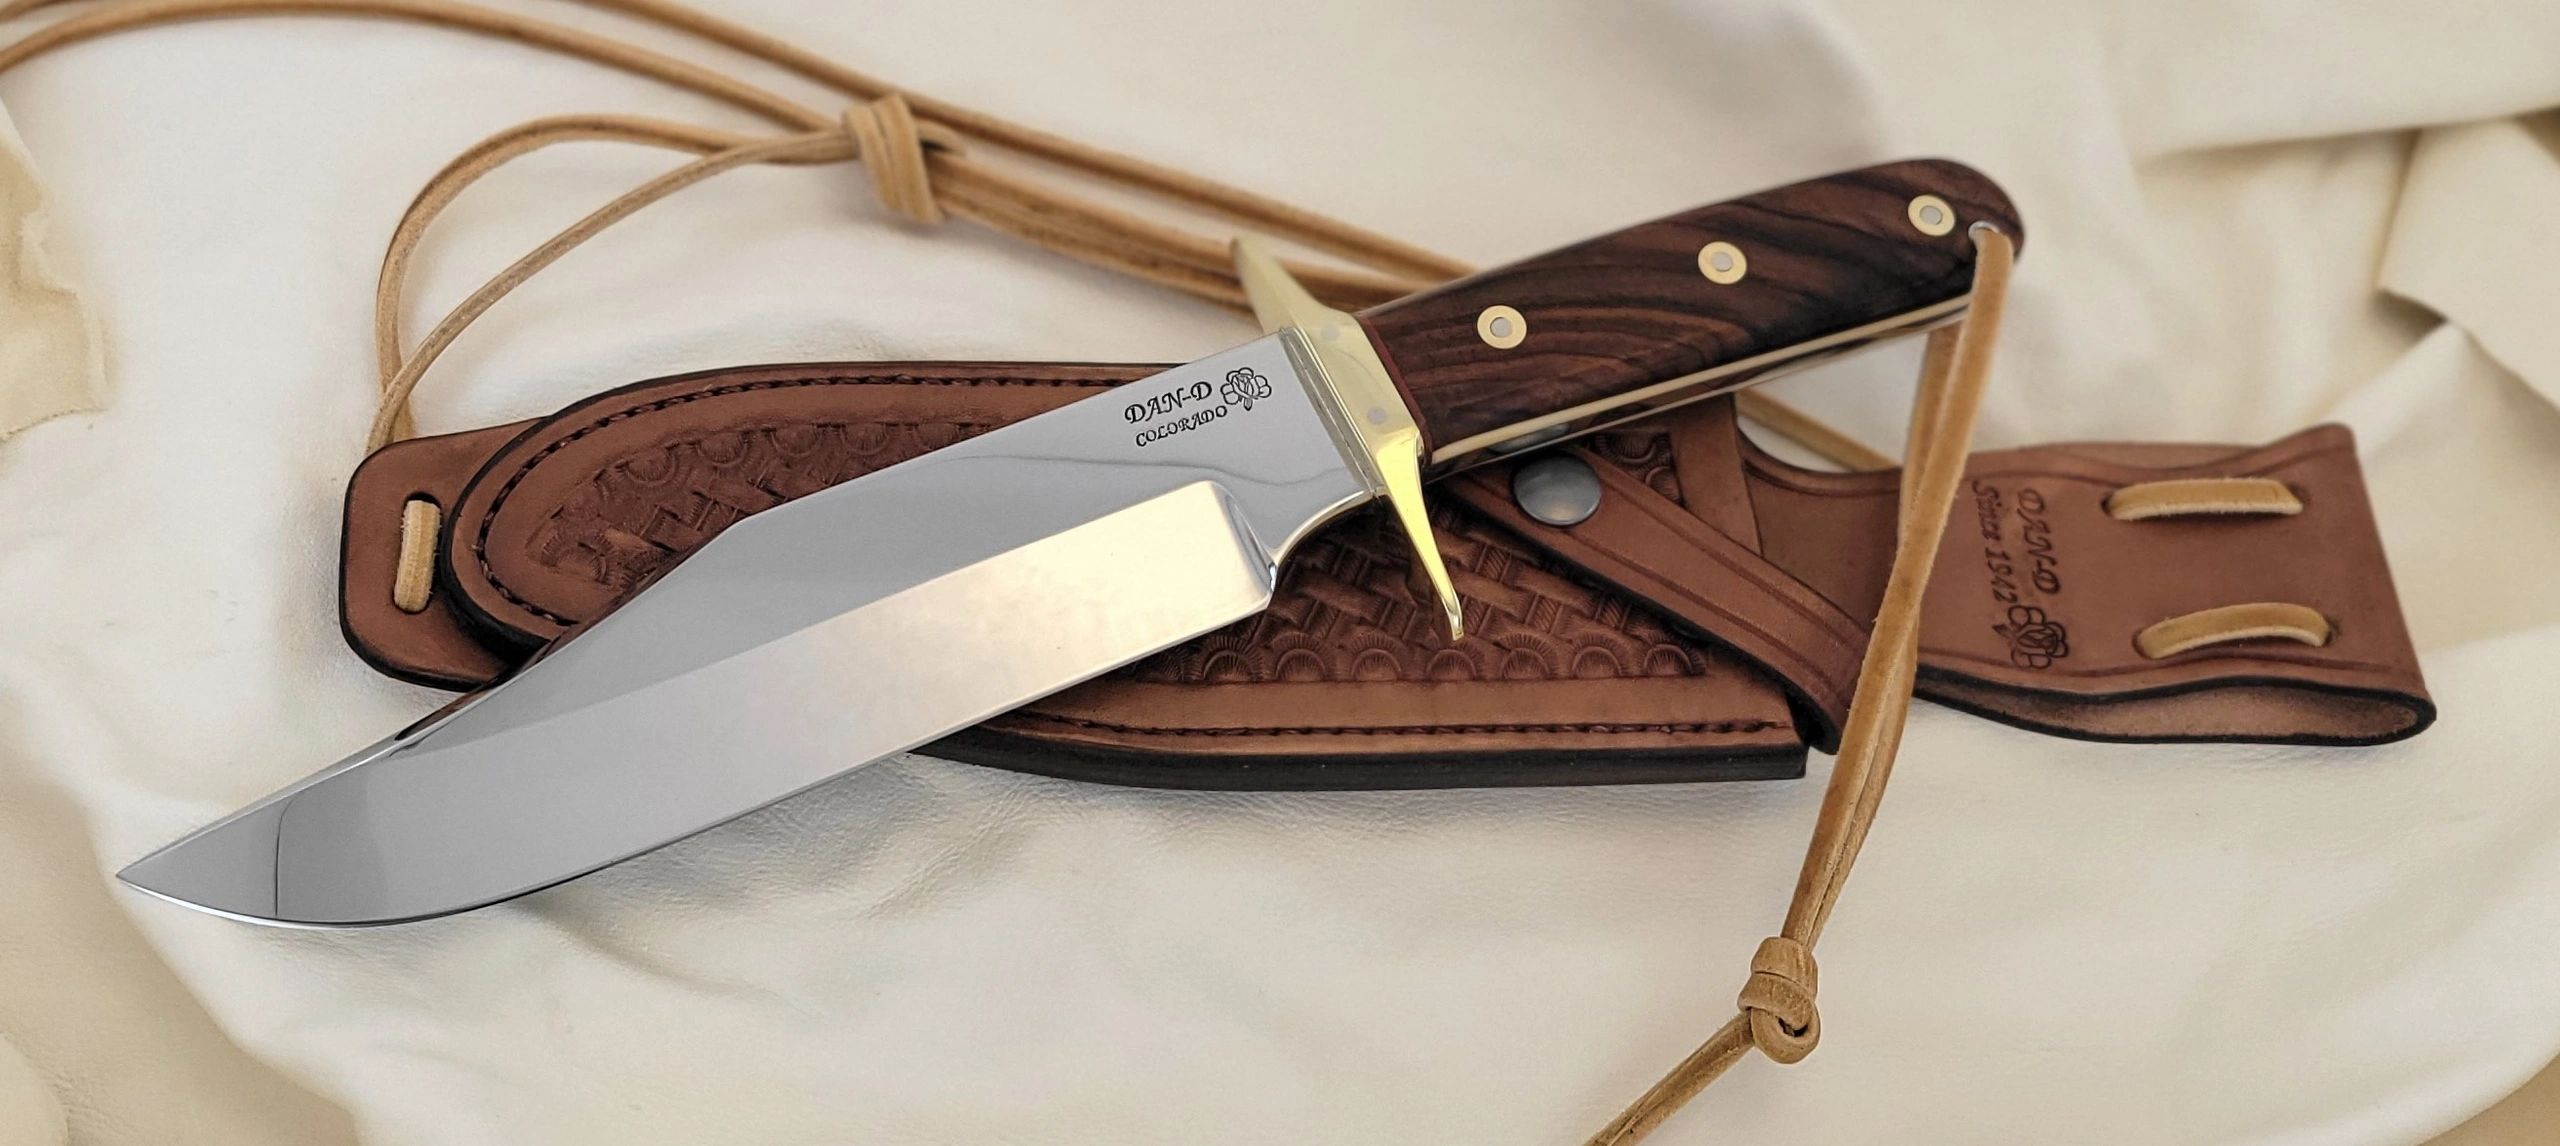 Model 20 The Huber Foxworth Bowie